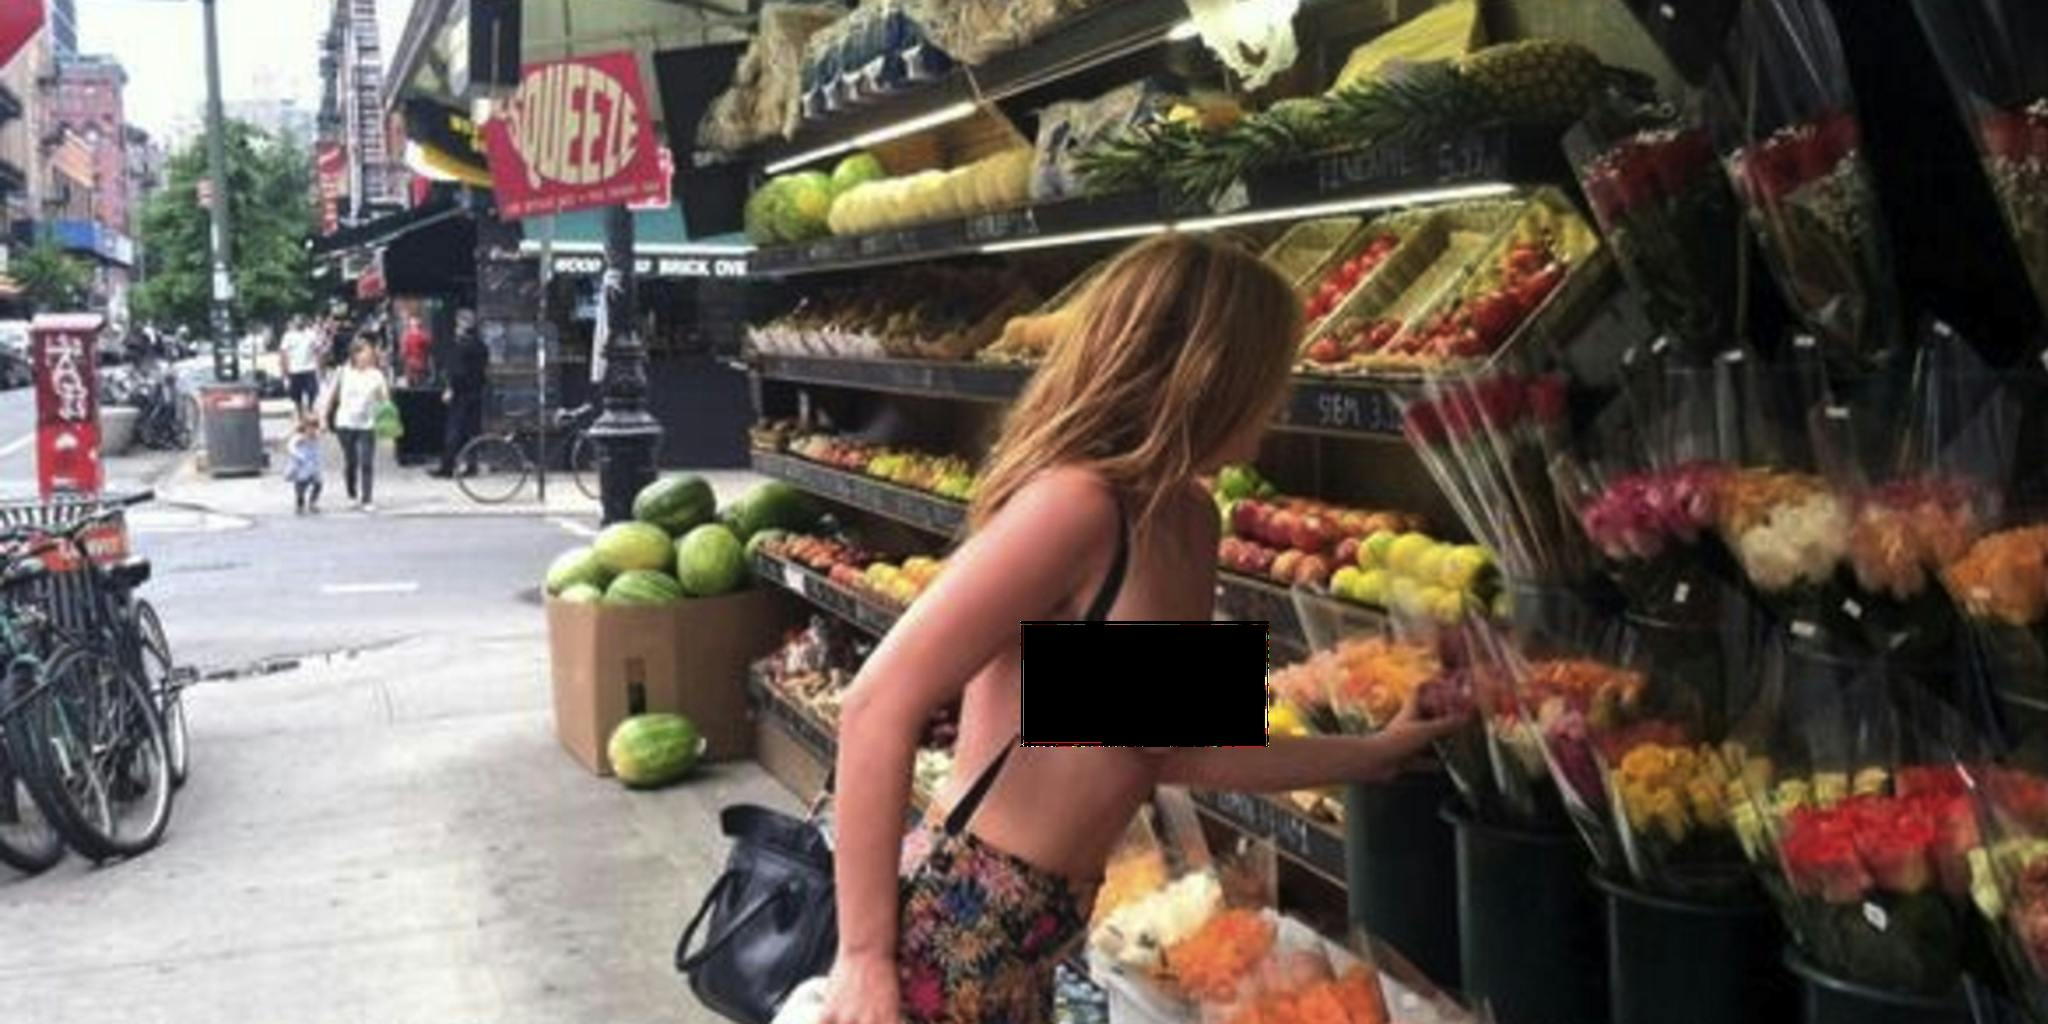 Bruce Willis and Demi Moore's daughter walked around Manhattan topless to protest Instagram.